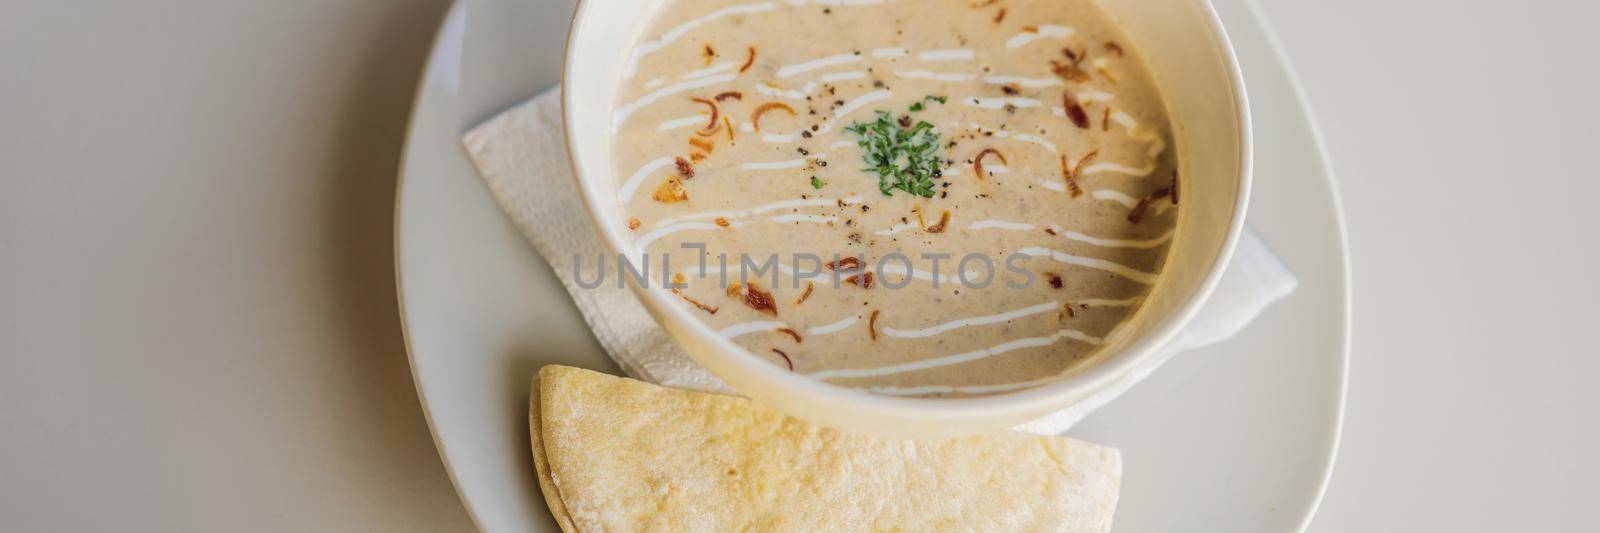 Puree soup with bread on white table BANNER, LONG FORMAT by galitskaya